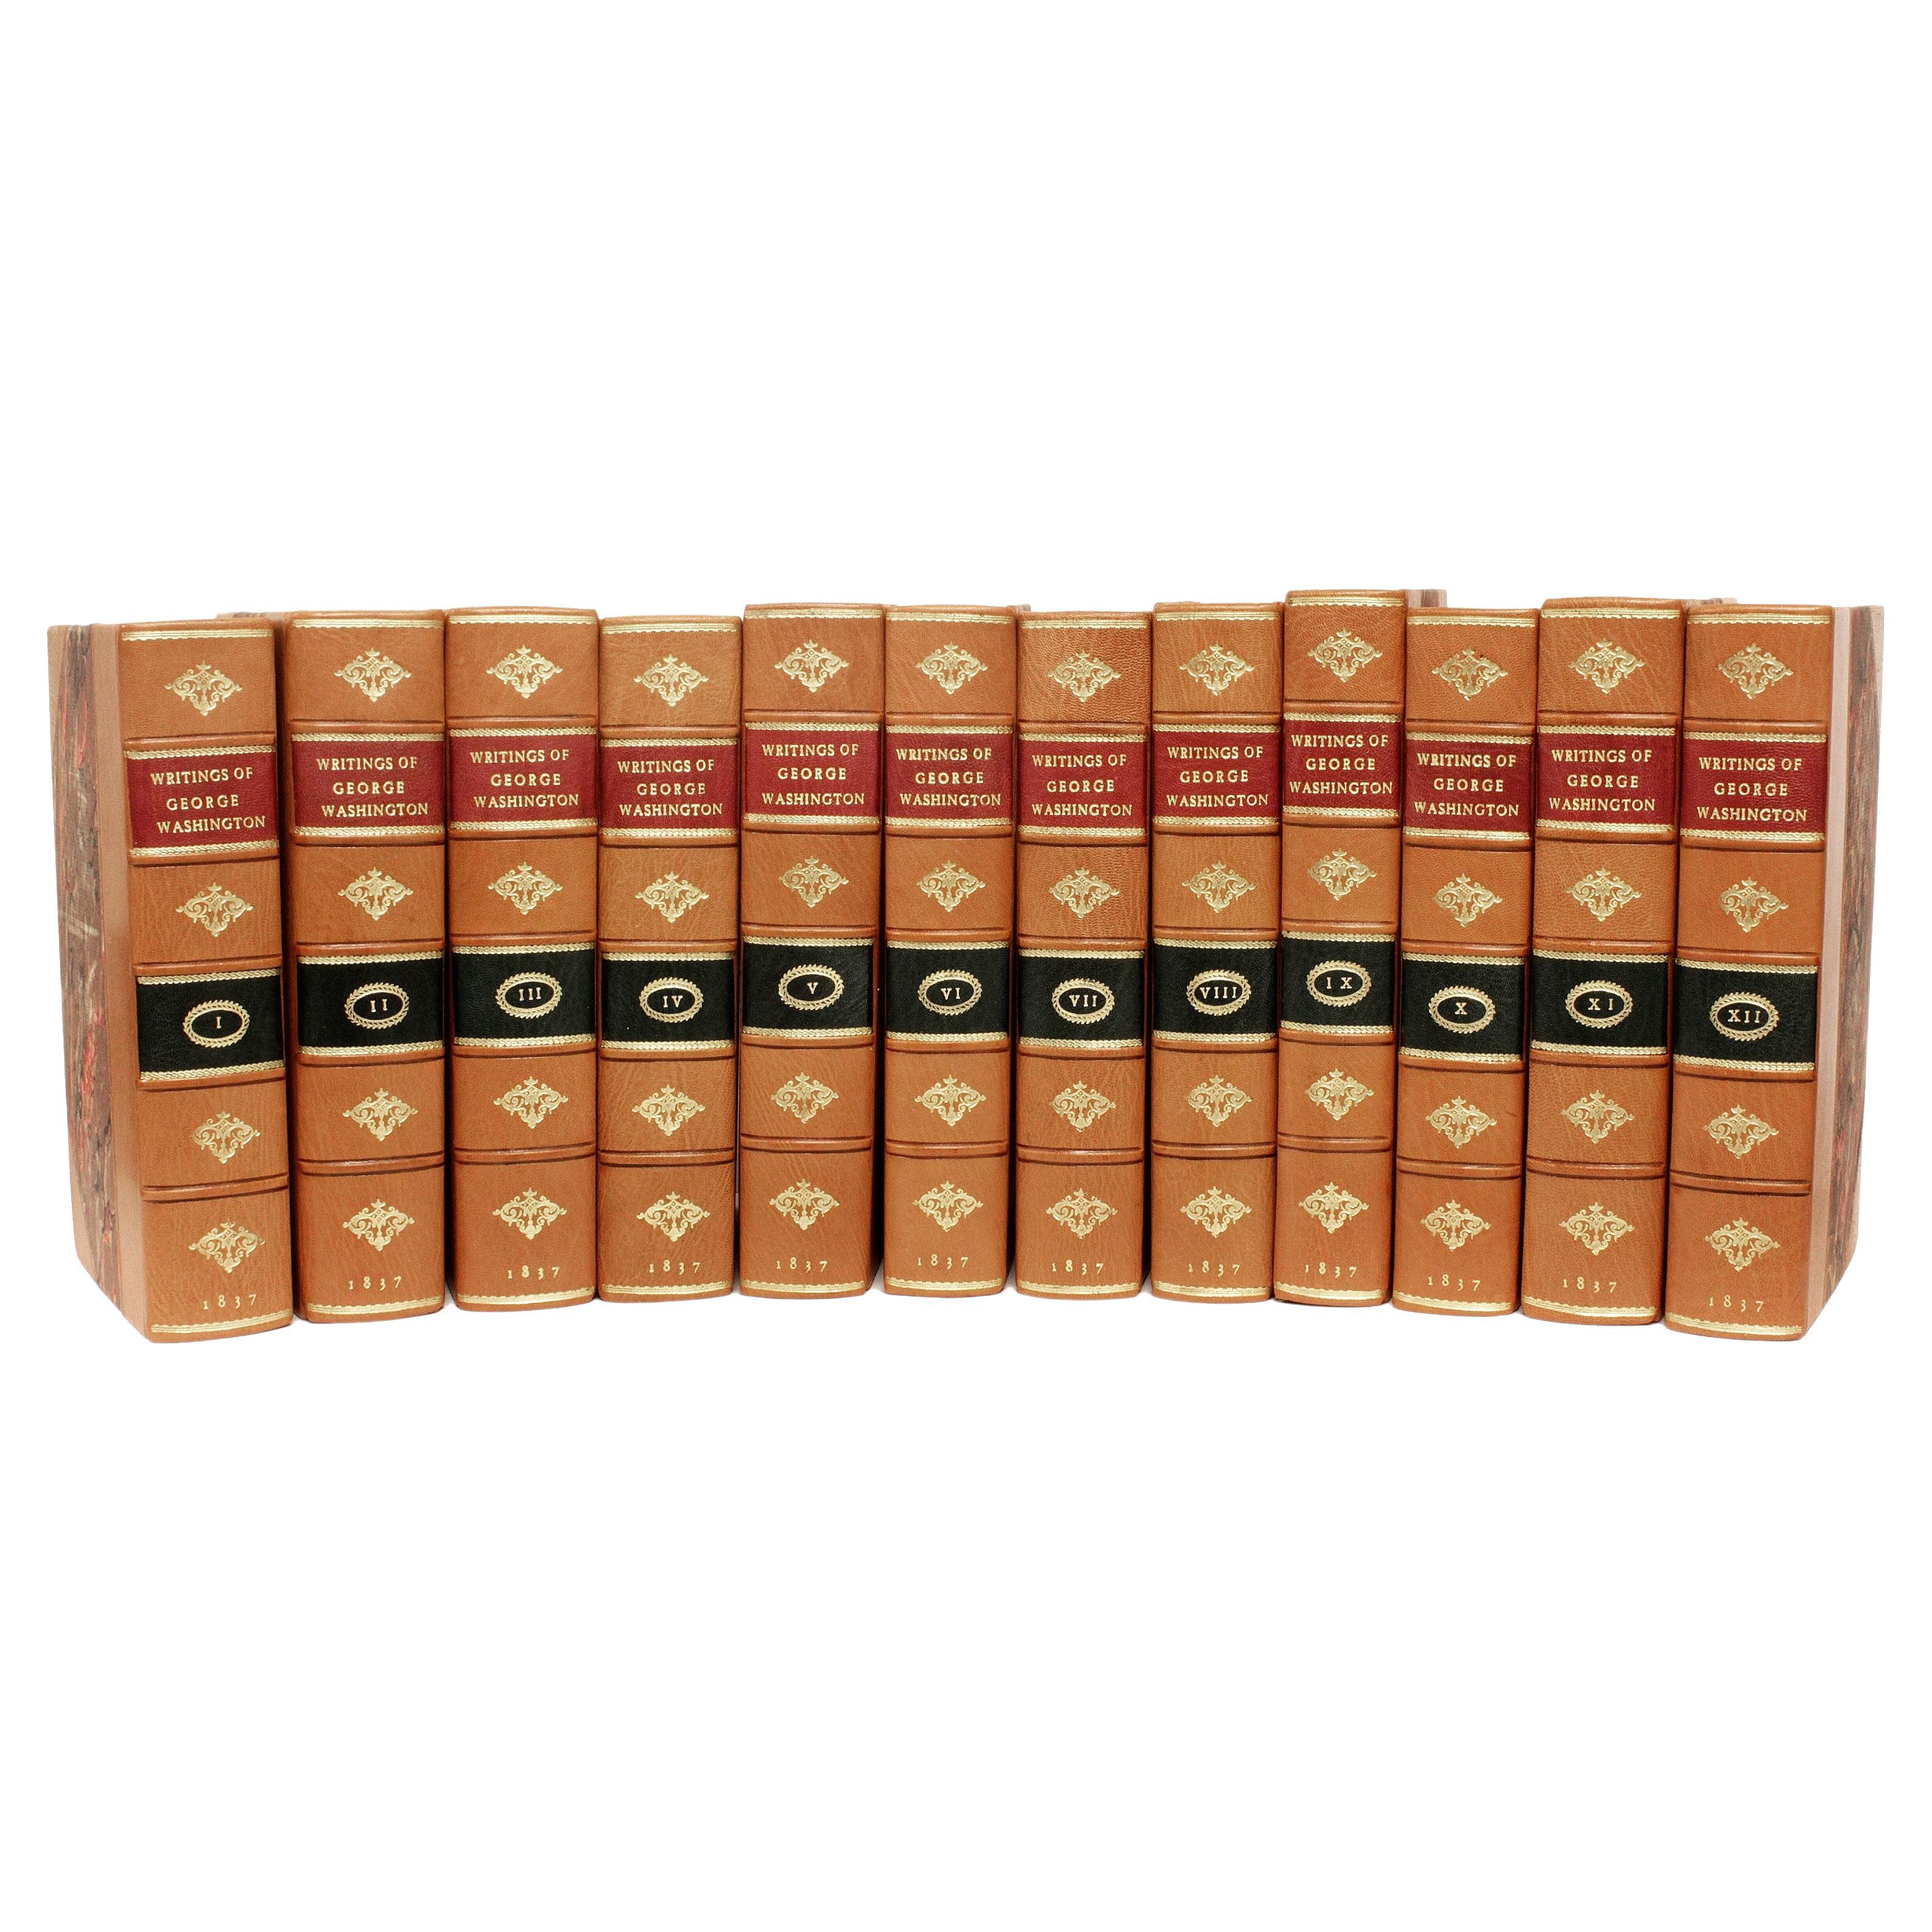 The Writings of George Washington. 12 VOLS - 1837 - IN A FINE LEATHER BINDING!